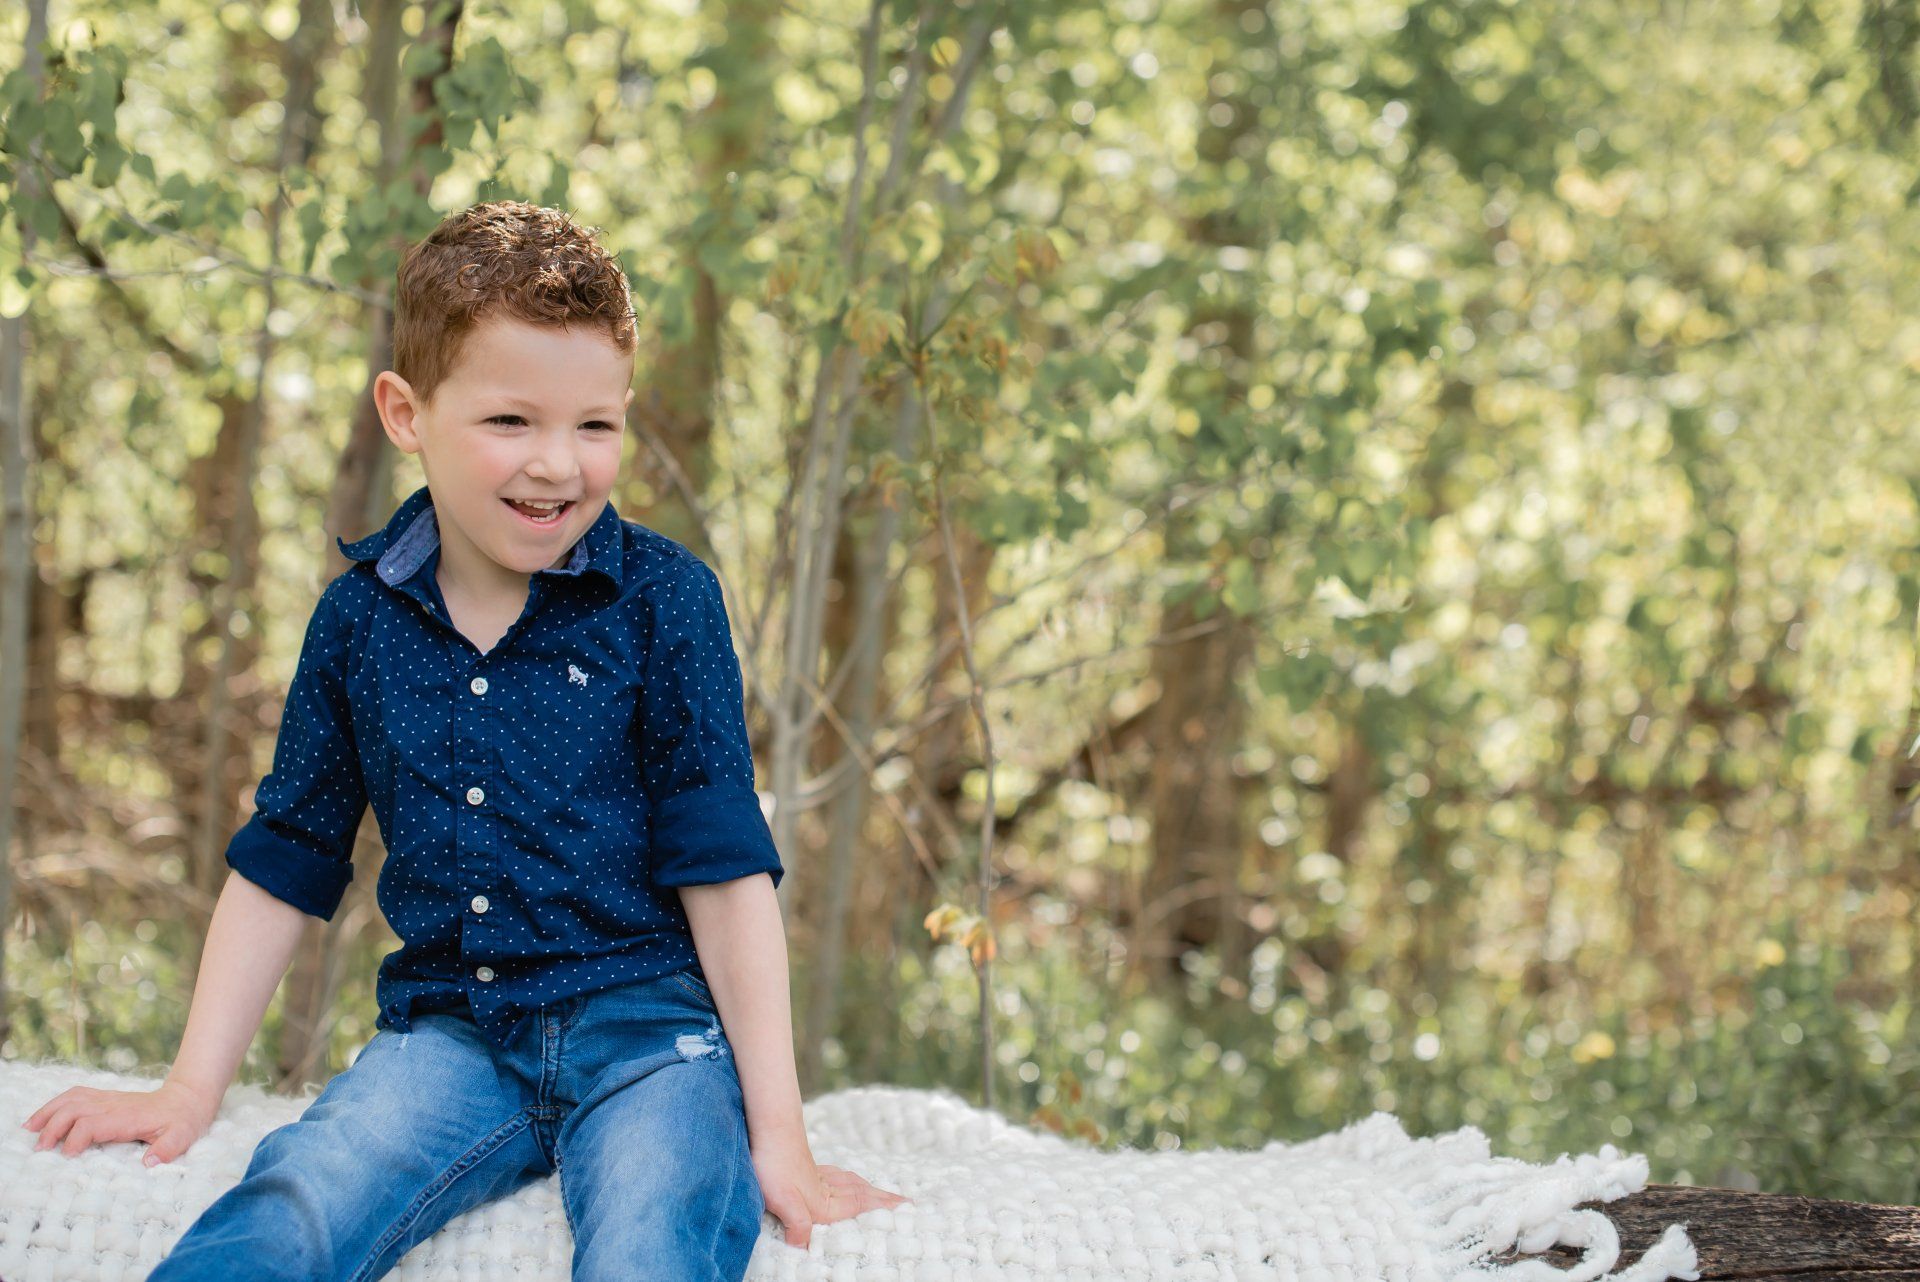 Young boy sitting | Child photography | Stacey Naglie Toronto